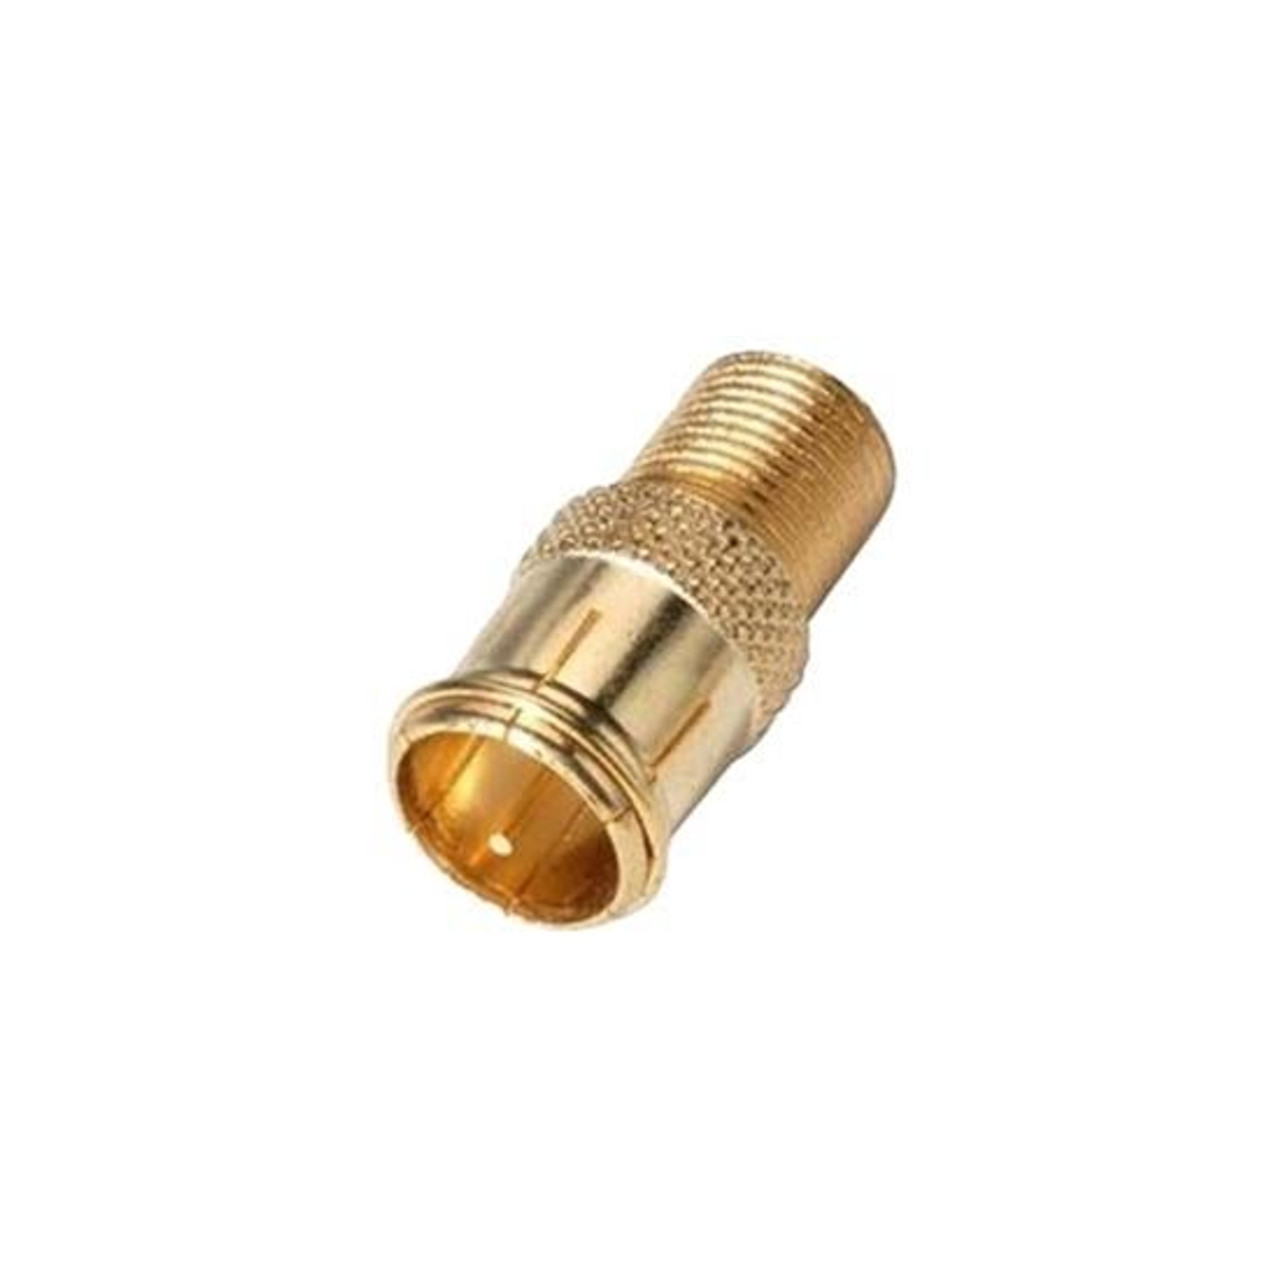 RCA Audiovox VH68RV F-Male Female Quick F Connector Adapter Gold Plate Push-On Female to Male Coaxial Cable Connection, Sold as Singles